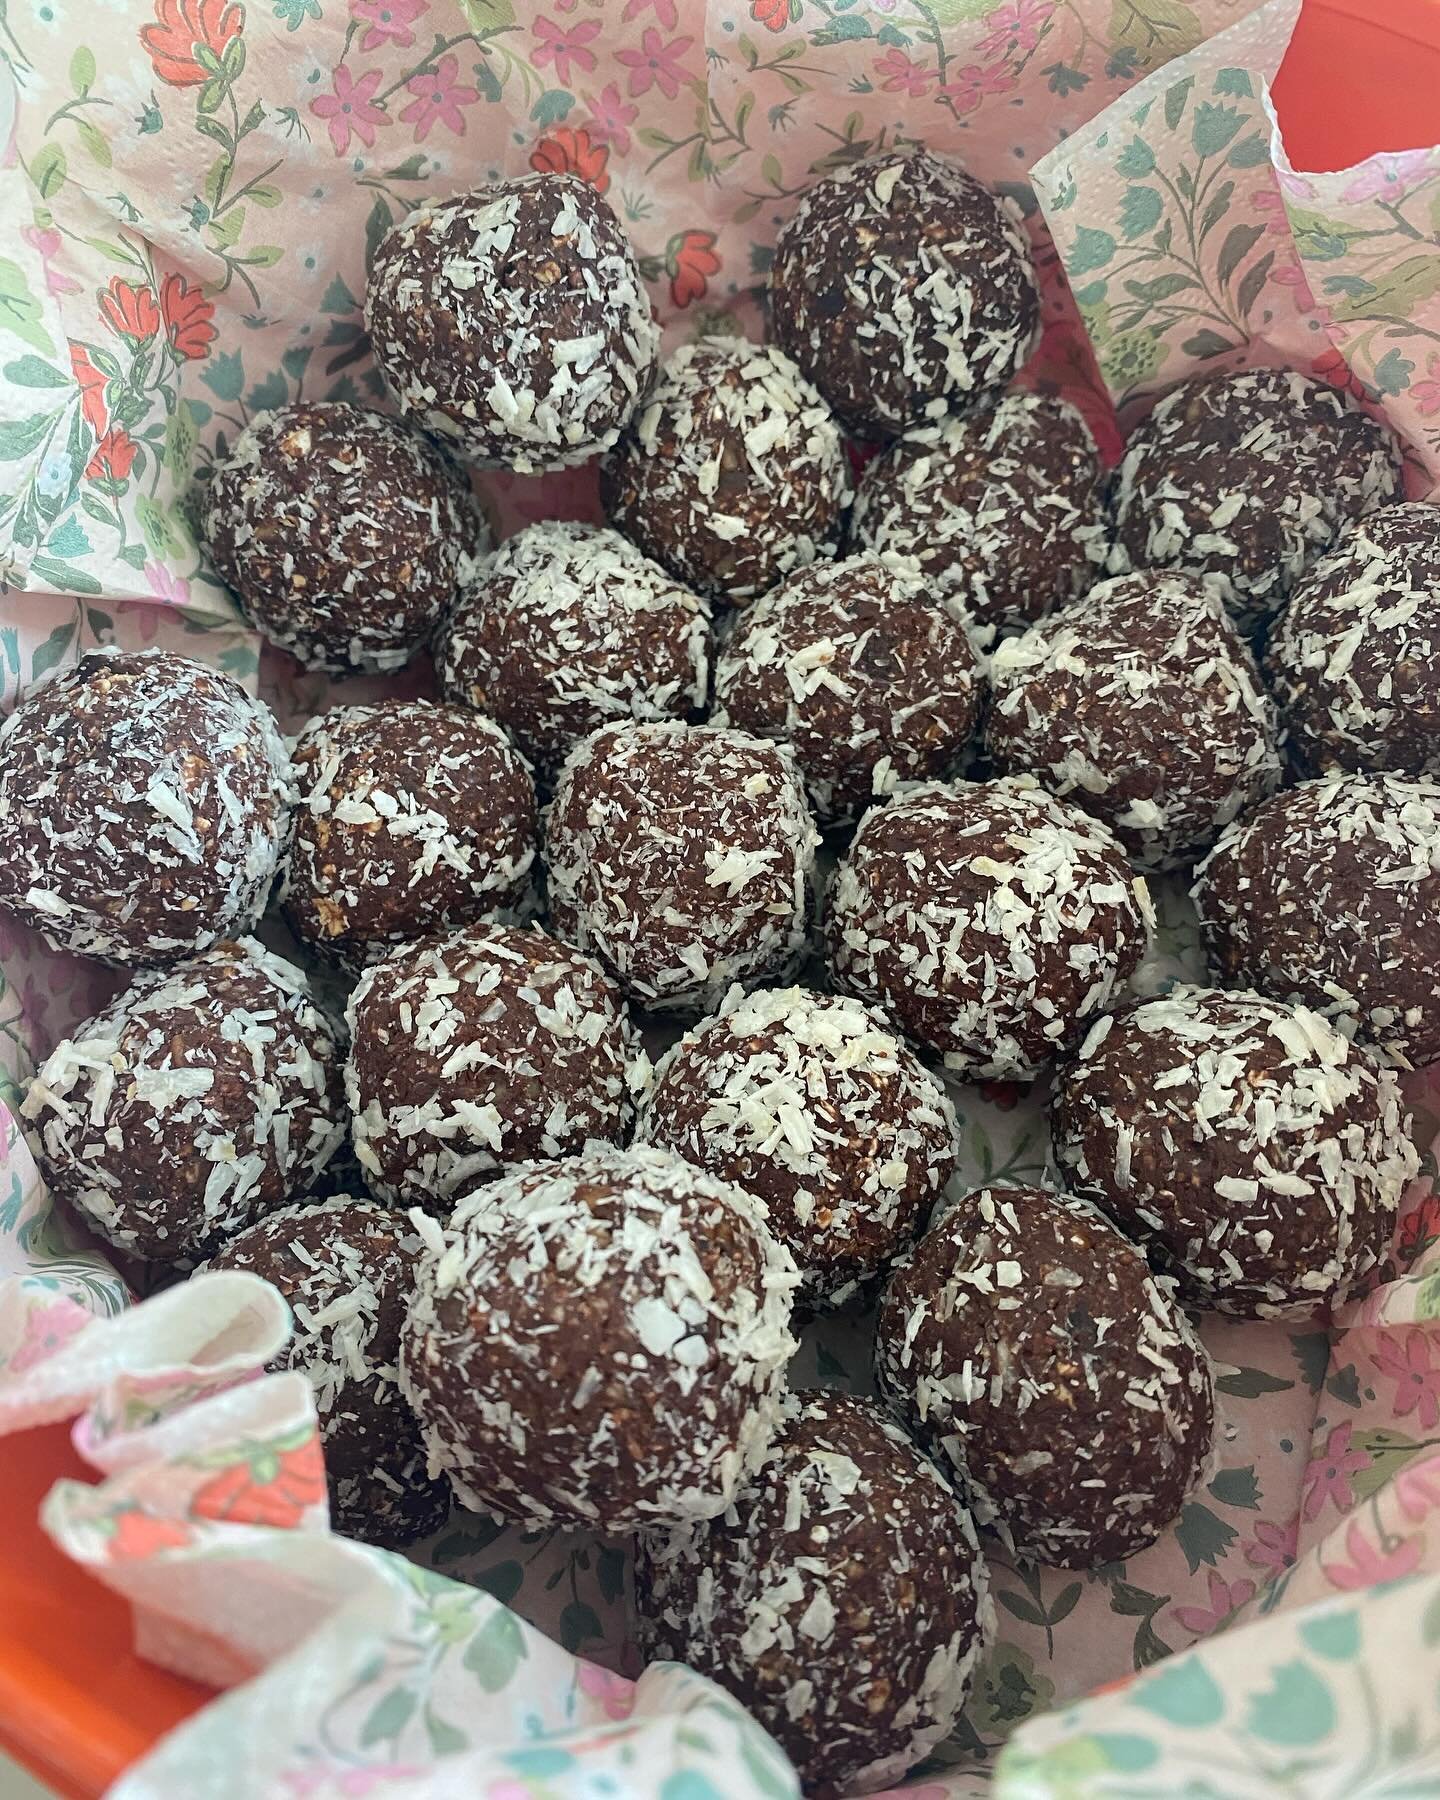 OJAS BALLS! 

Just made a couple of batches of these delightful Ojas Balls ready for our Soulful Sunday Yoga Retreat Day! Yum! 😋 

Per batch - makes around 22 balls
40g raw cacao
180g raw oats
70g pecans
190g dates - soaked in warm water to soften. 